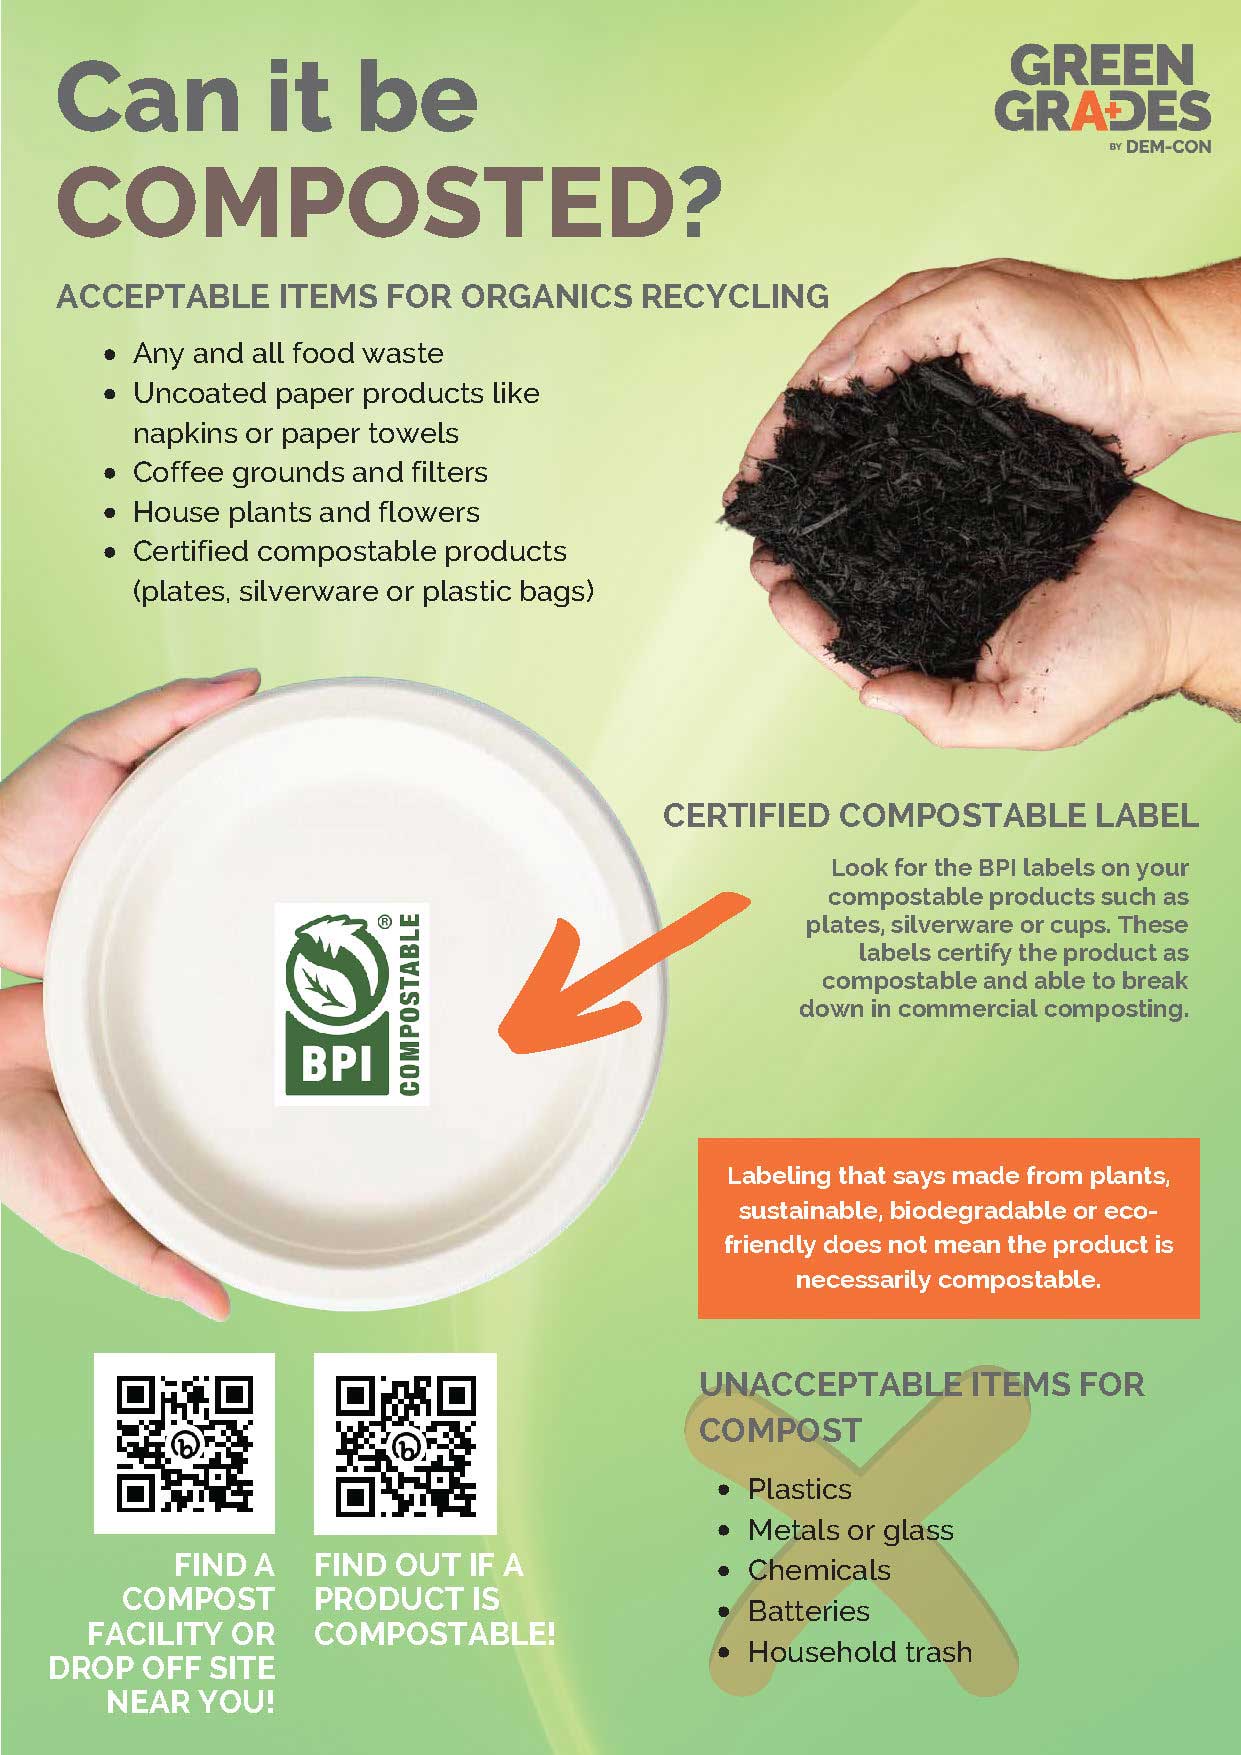 A quick cheat sheet on what can and cannot be composted